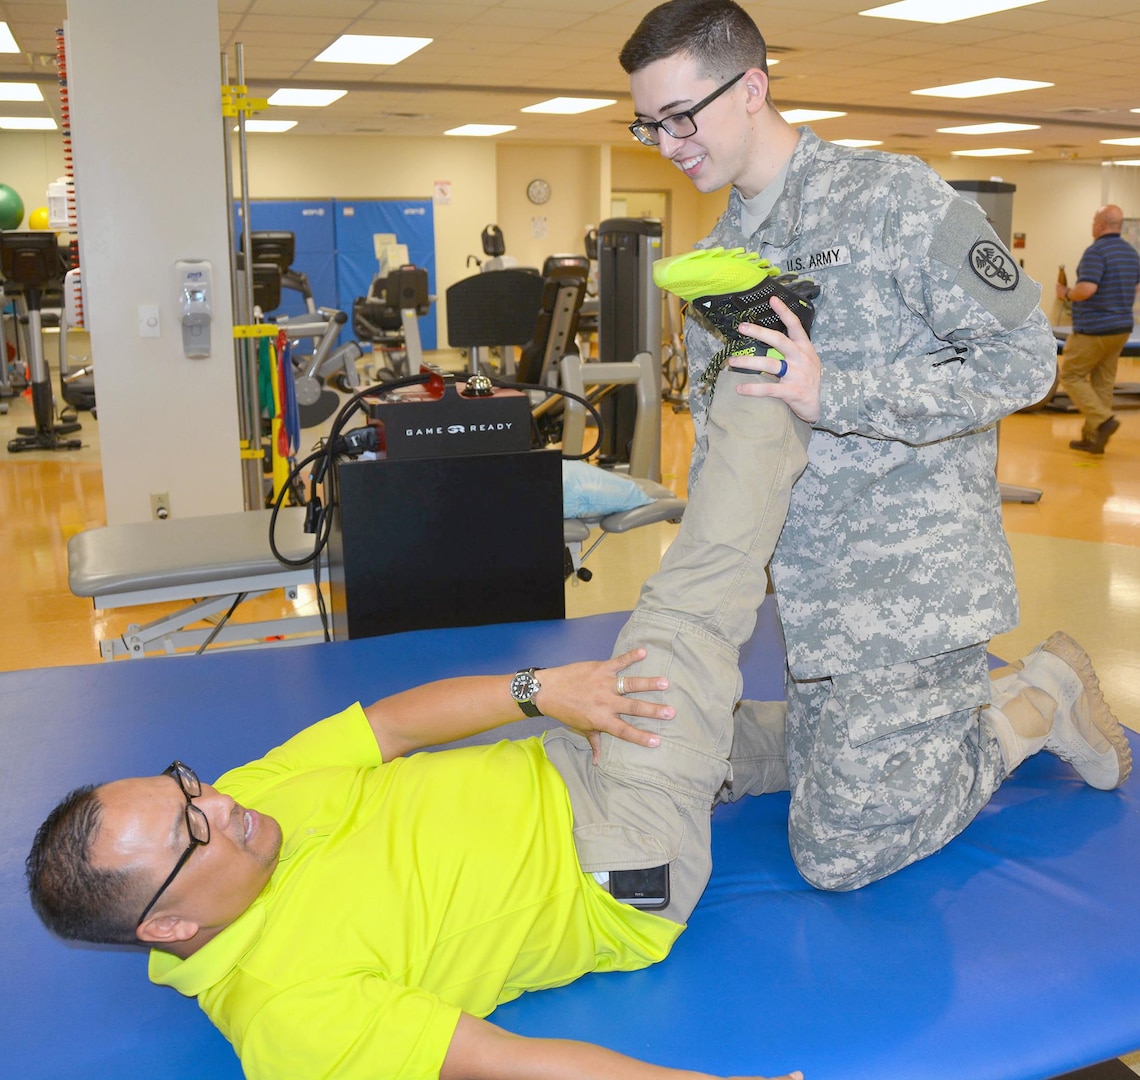 Pfc. Cole Blancett (right), physical therapy assistant, helps Douglas Biala stretch during a physical therapy appointment March 6 at the Capt. Jennifer M. Moreno Primary Care Clinic at Fort Sam Houston. Two physical therapists and two physical therapy assistants are available by appointment from 4:30 p.m. to 7:30 p.m. Monday through Thursday.